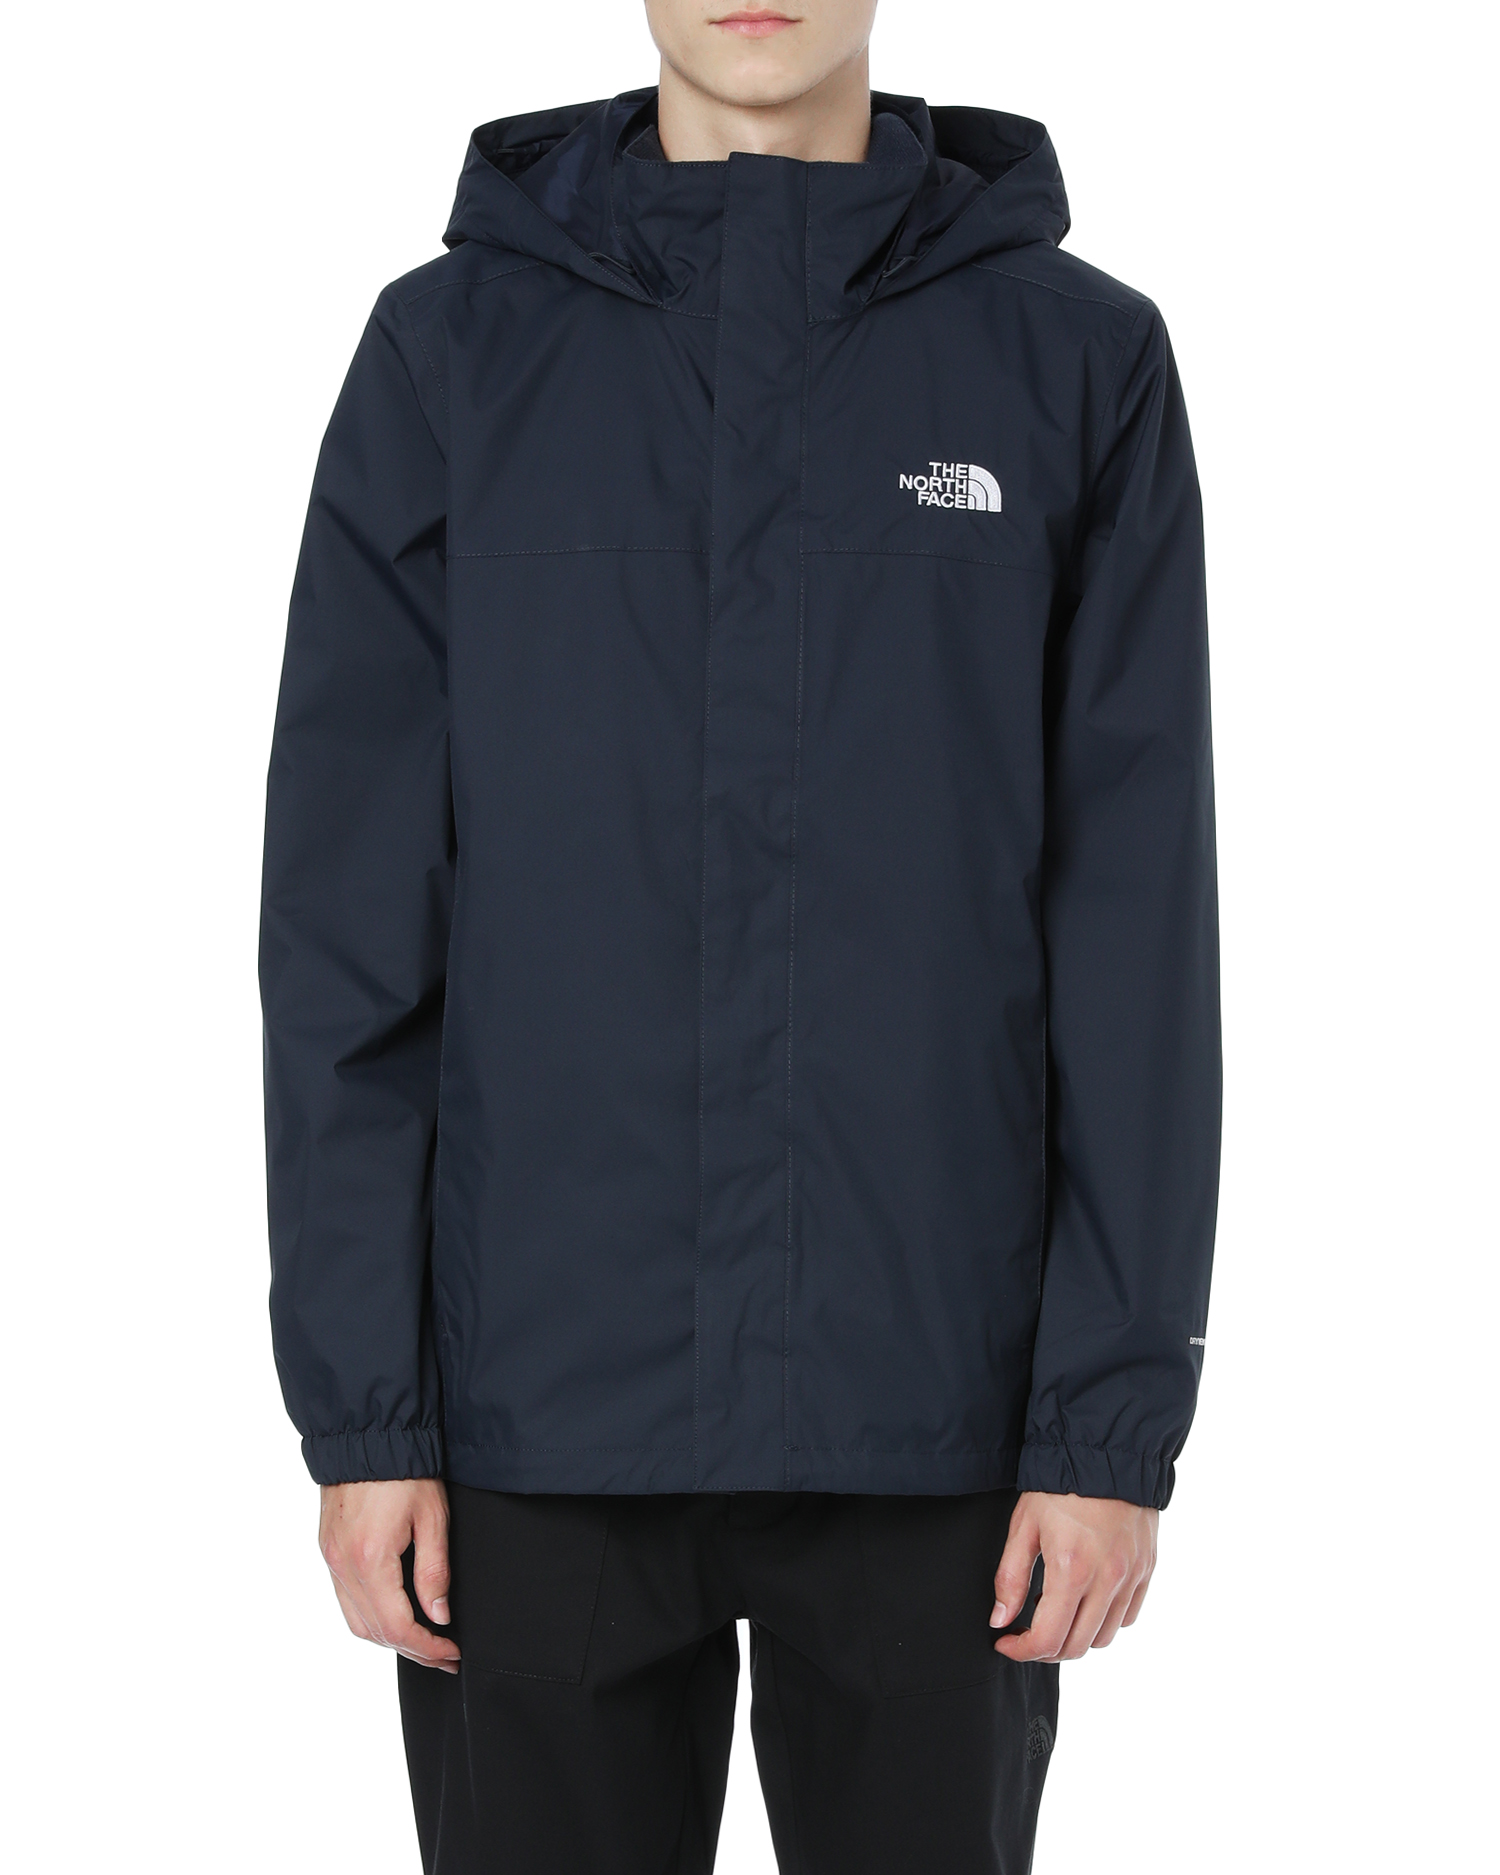 sangro the north face